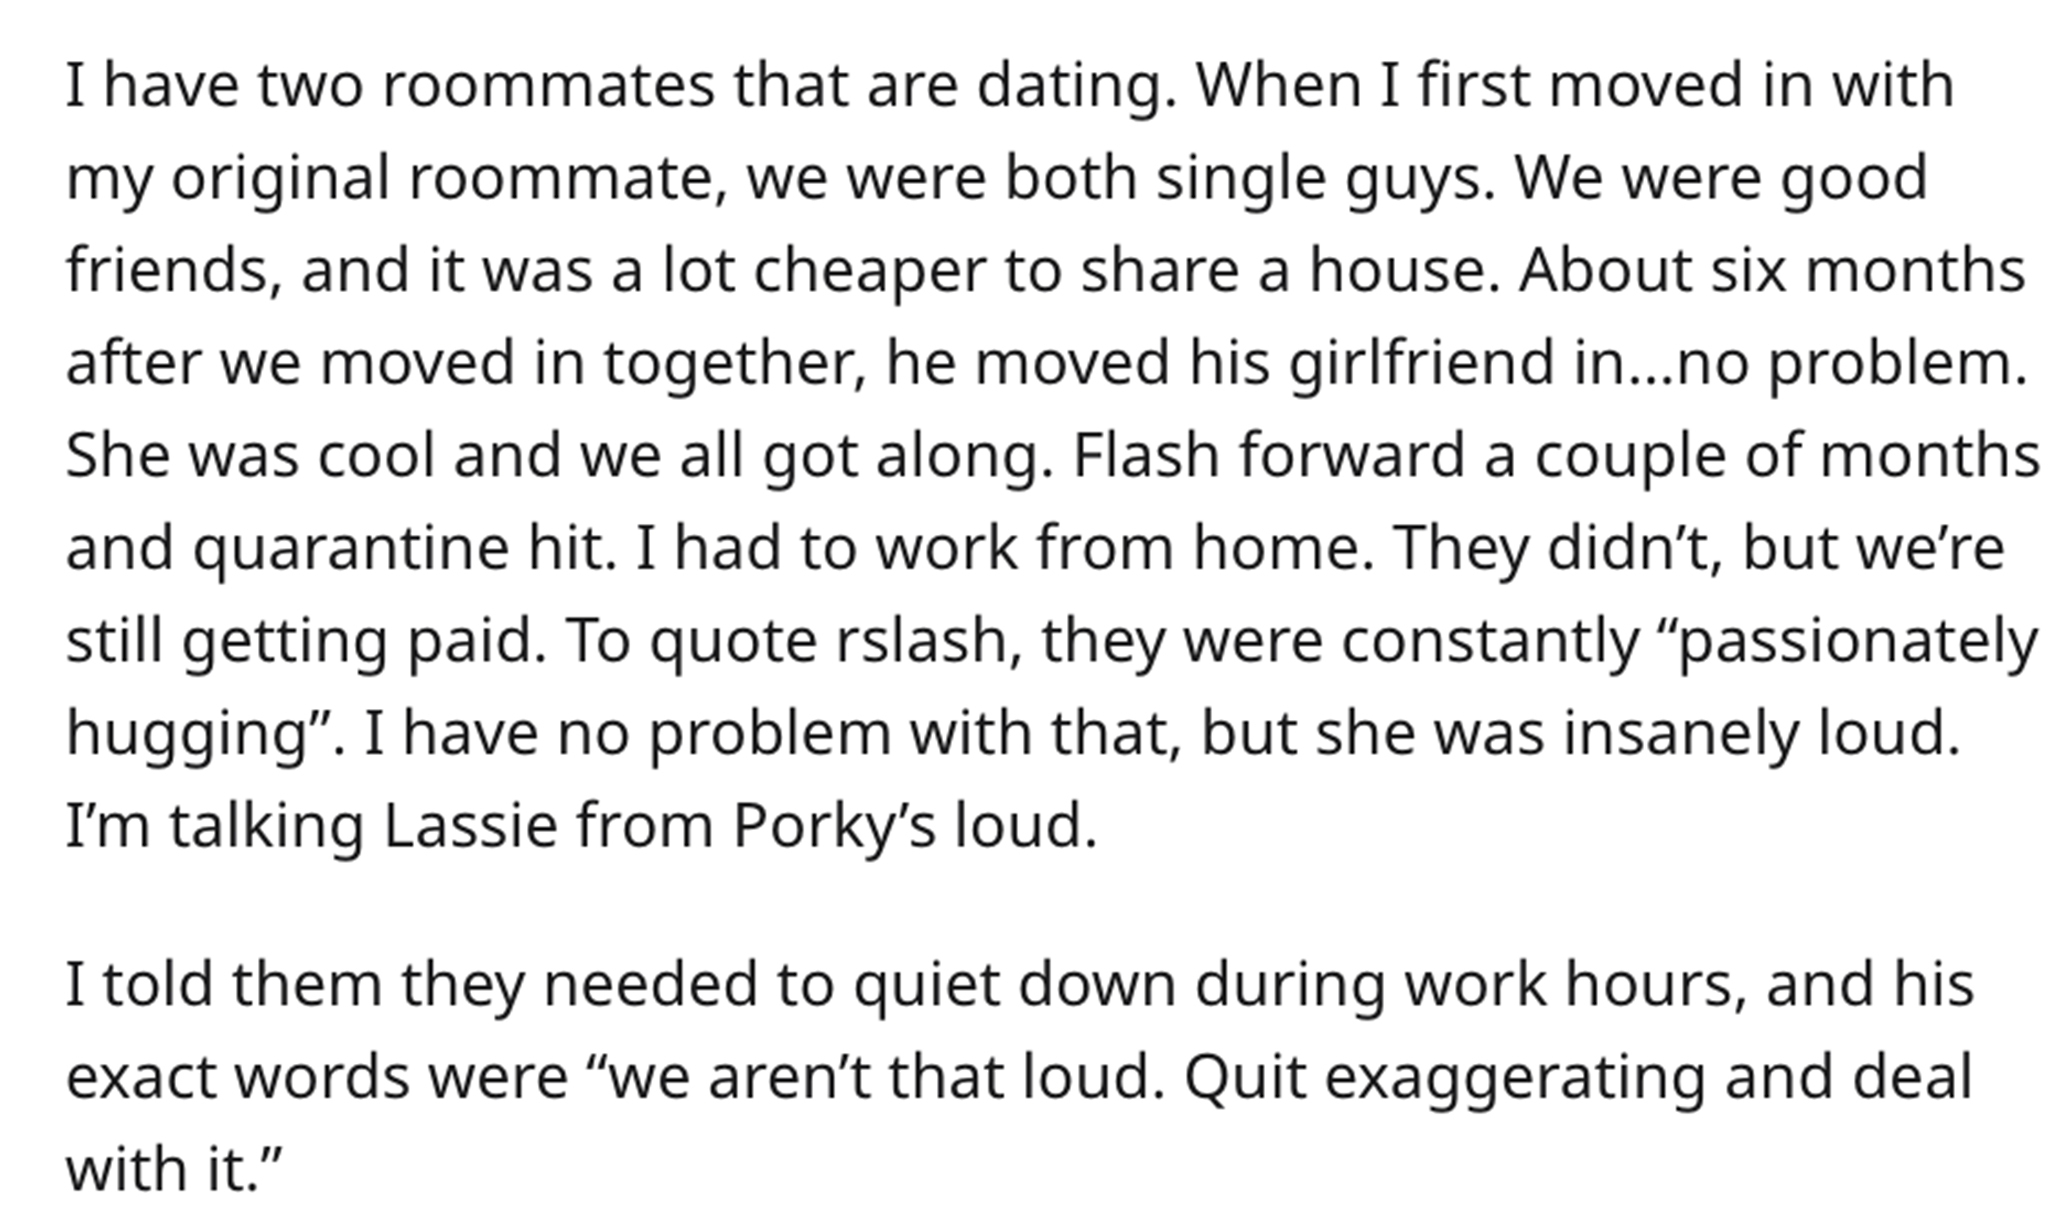 Petty Revenge Sex Story - document - I have two roommates that are dating. When I first moved in with my original roommate, we were both single guys. We were good friends, and it was a lot cheaper to a house. About six months after we moved in together, h